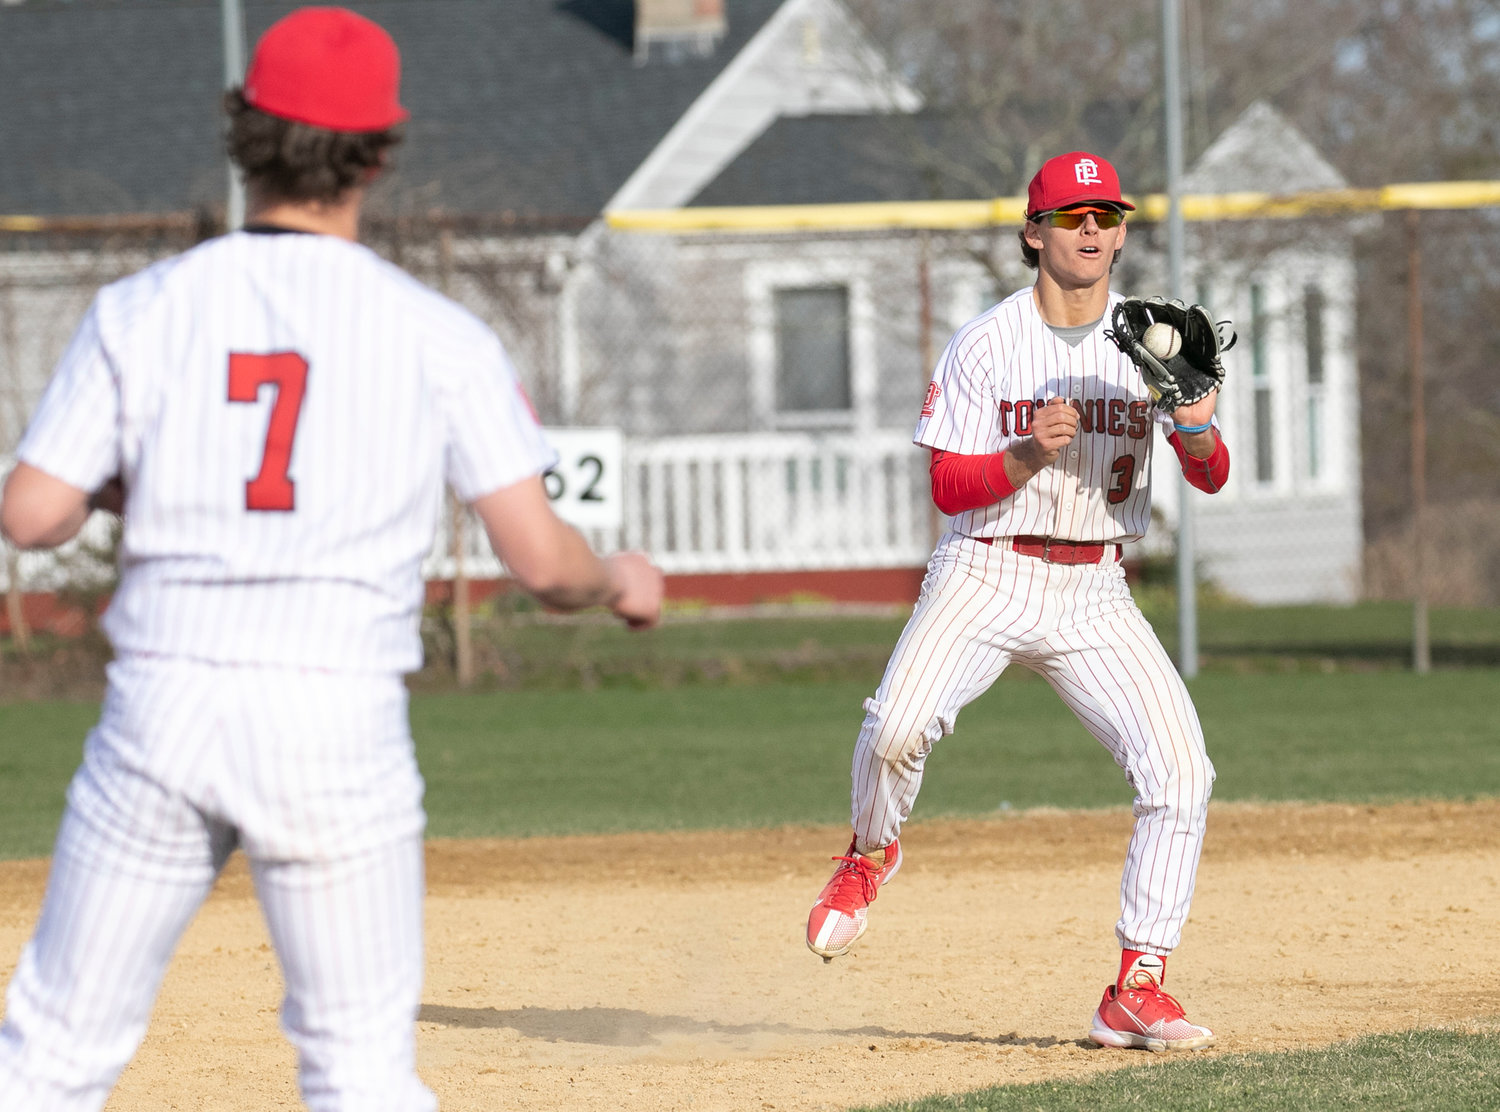 EPHS shortstop Jack McKnight and the Townies infield throw around the horn after a strikeout in their game last week at Portsmouth.